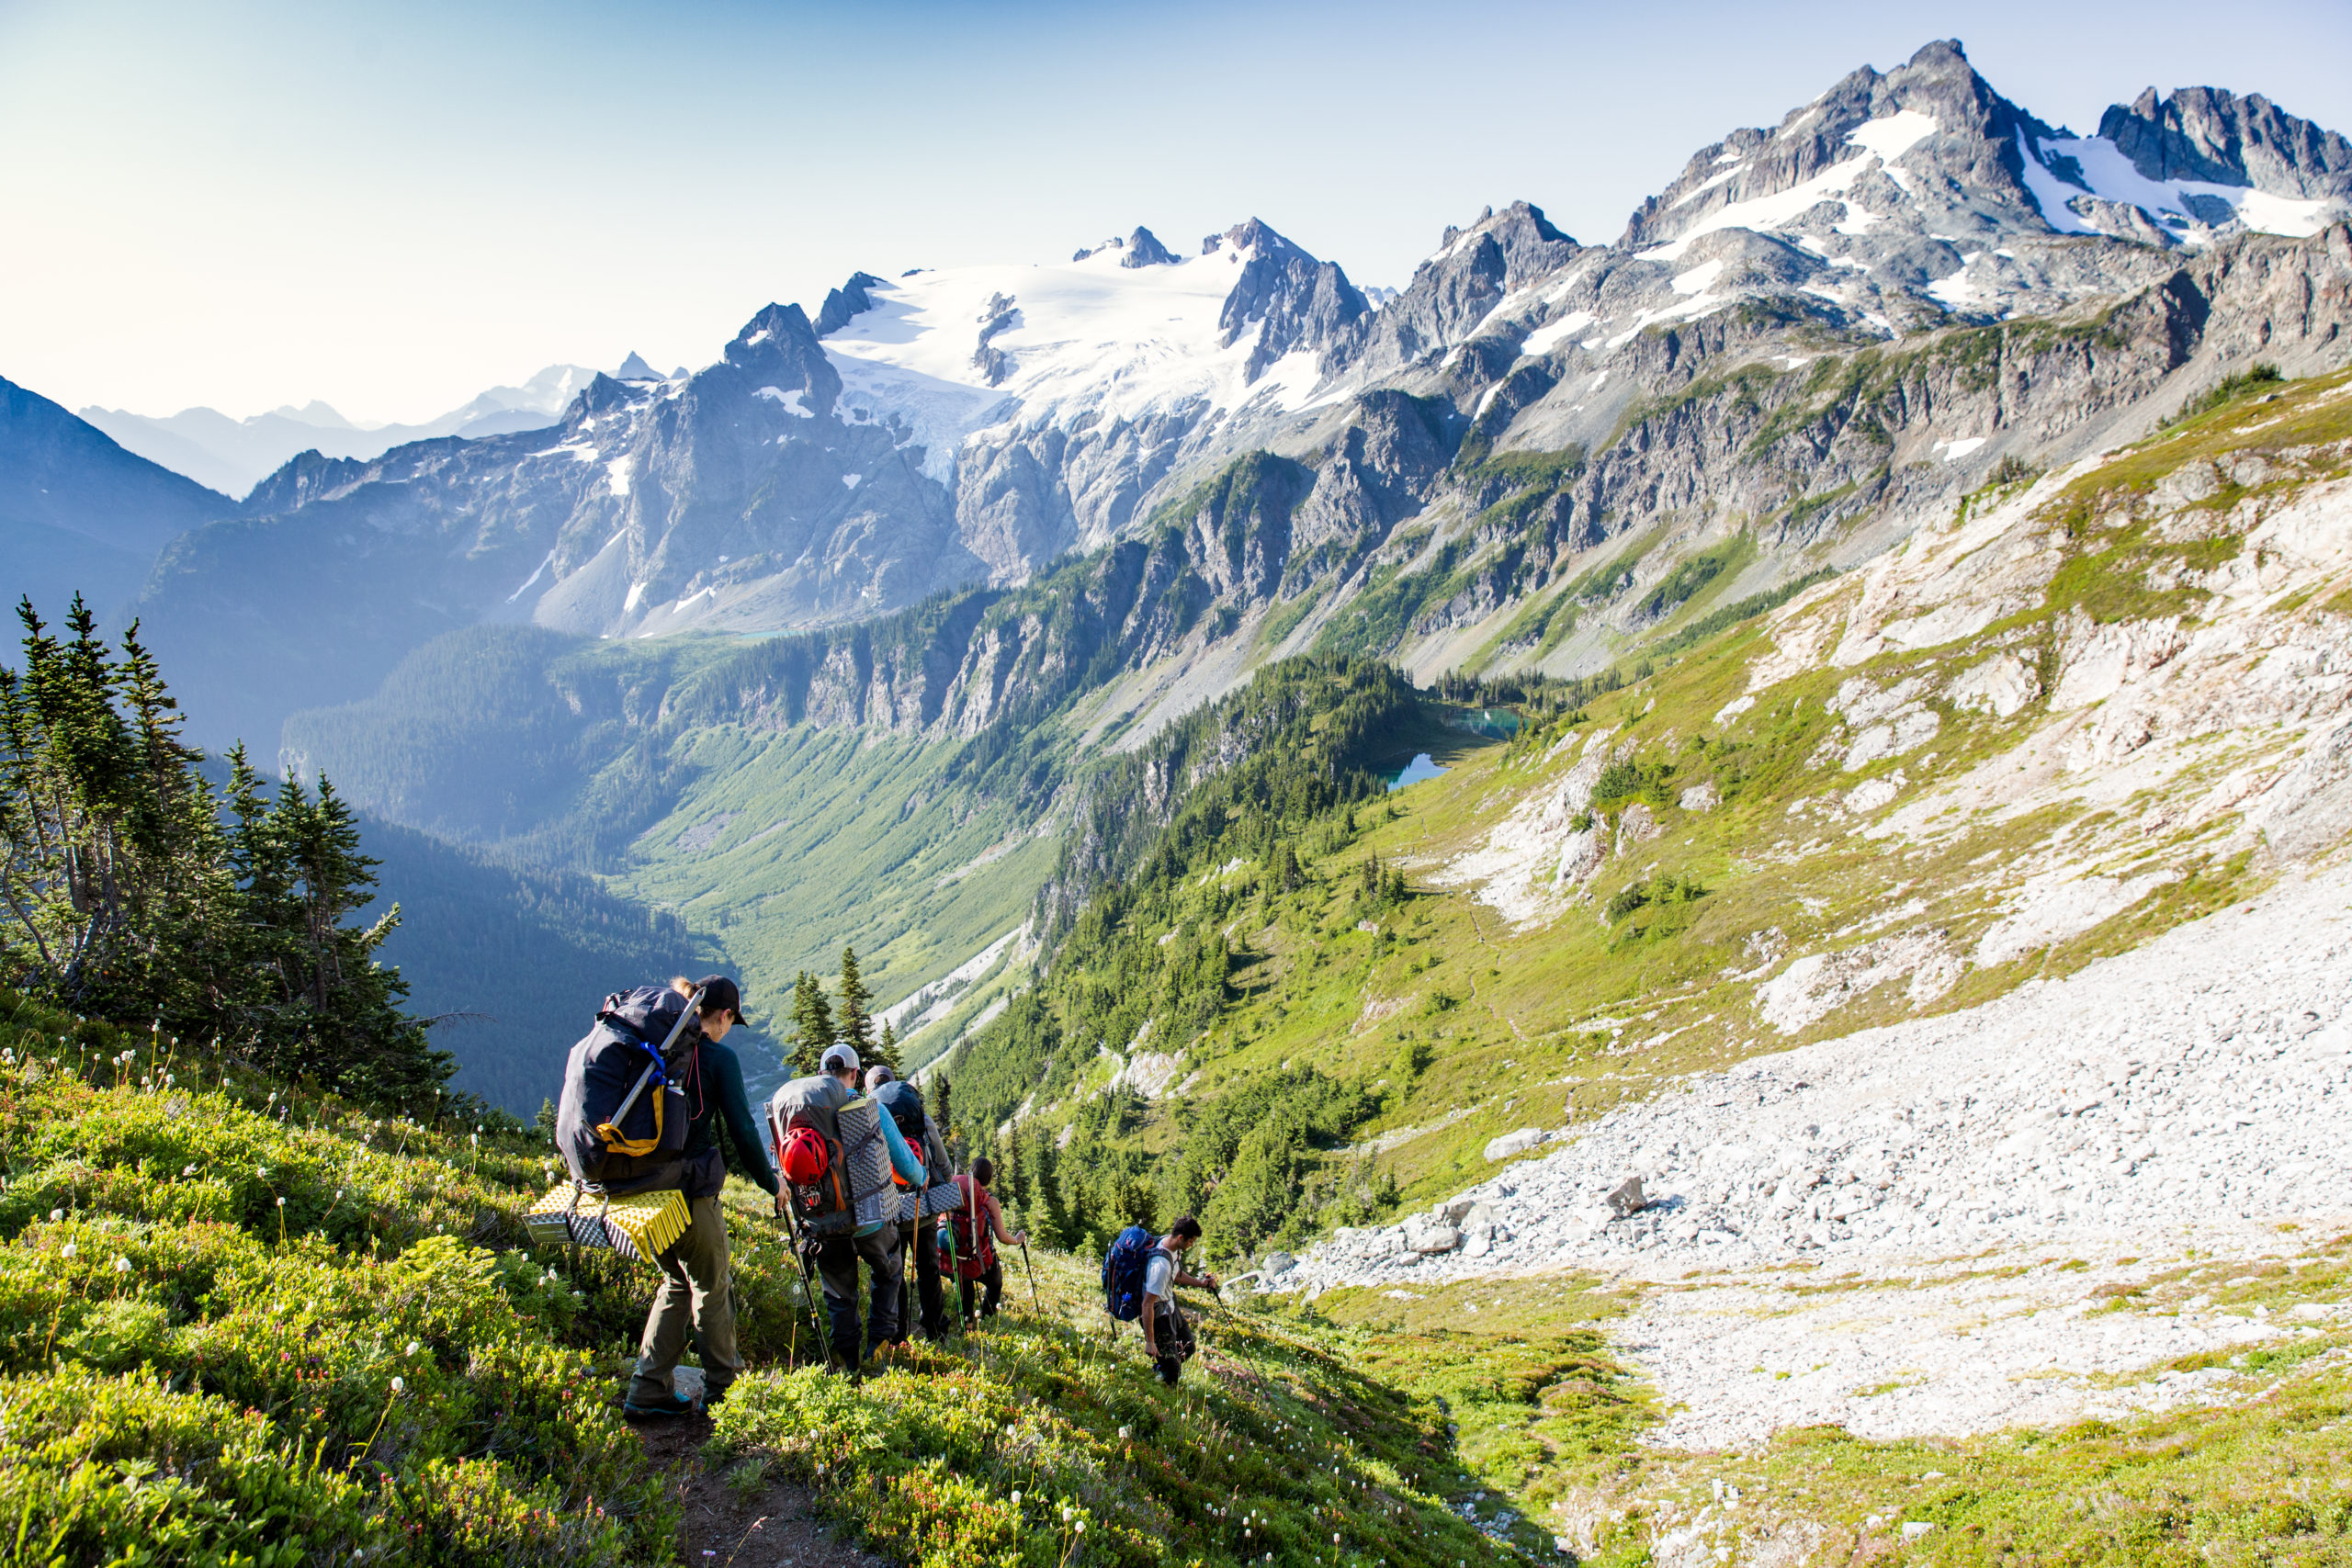 A group of backpackers walk single file along a trail with mountains ahead.